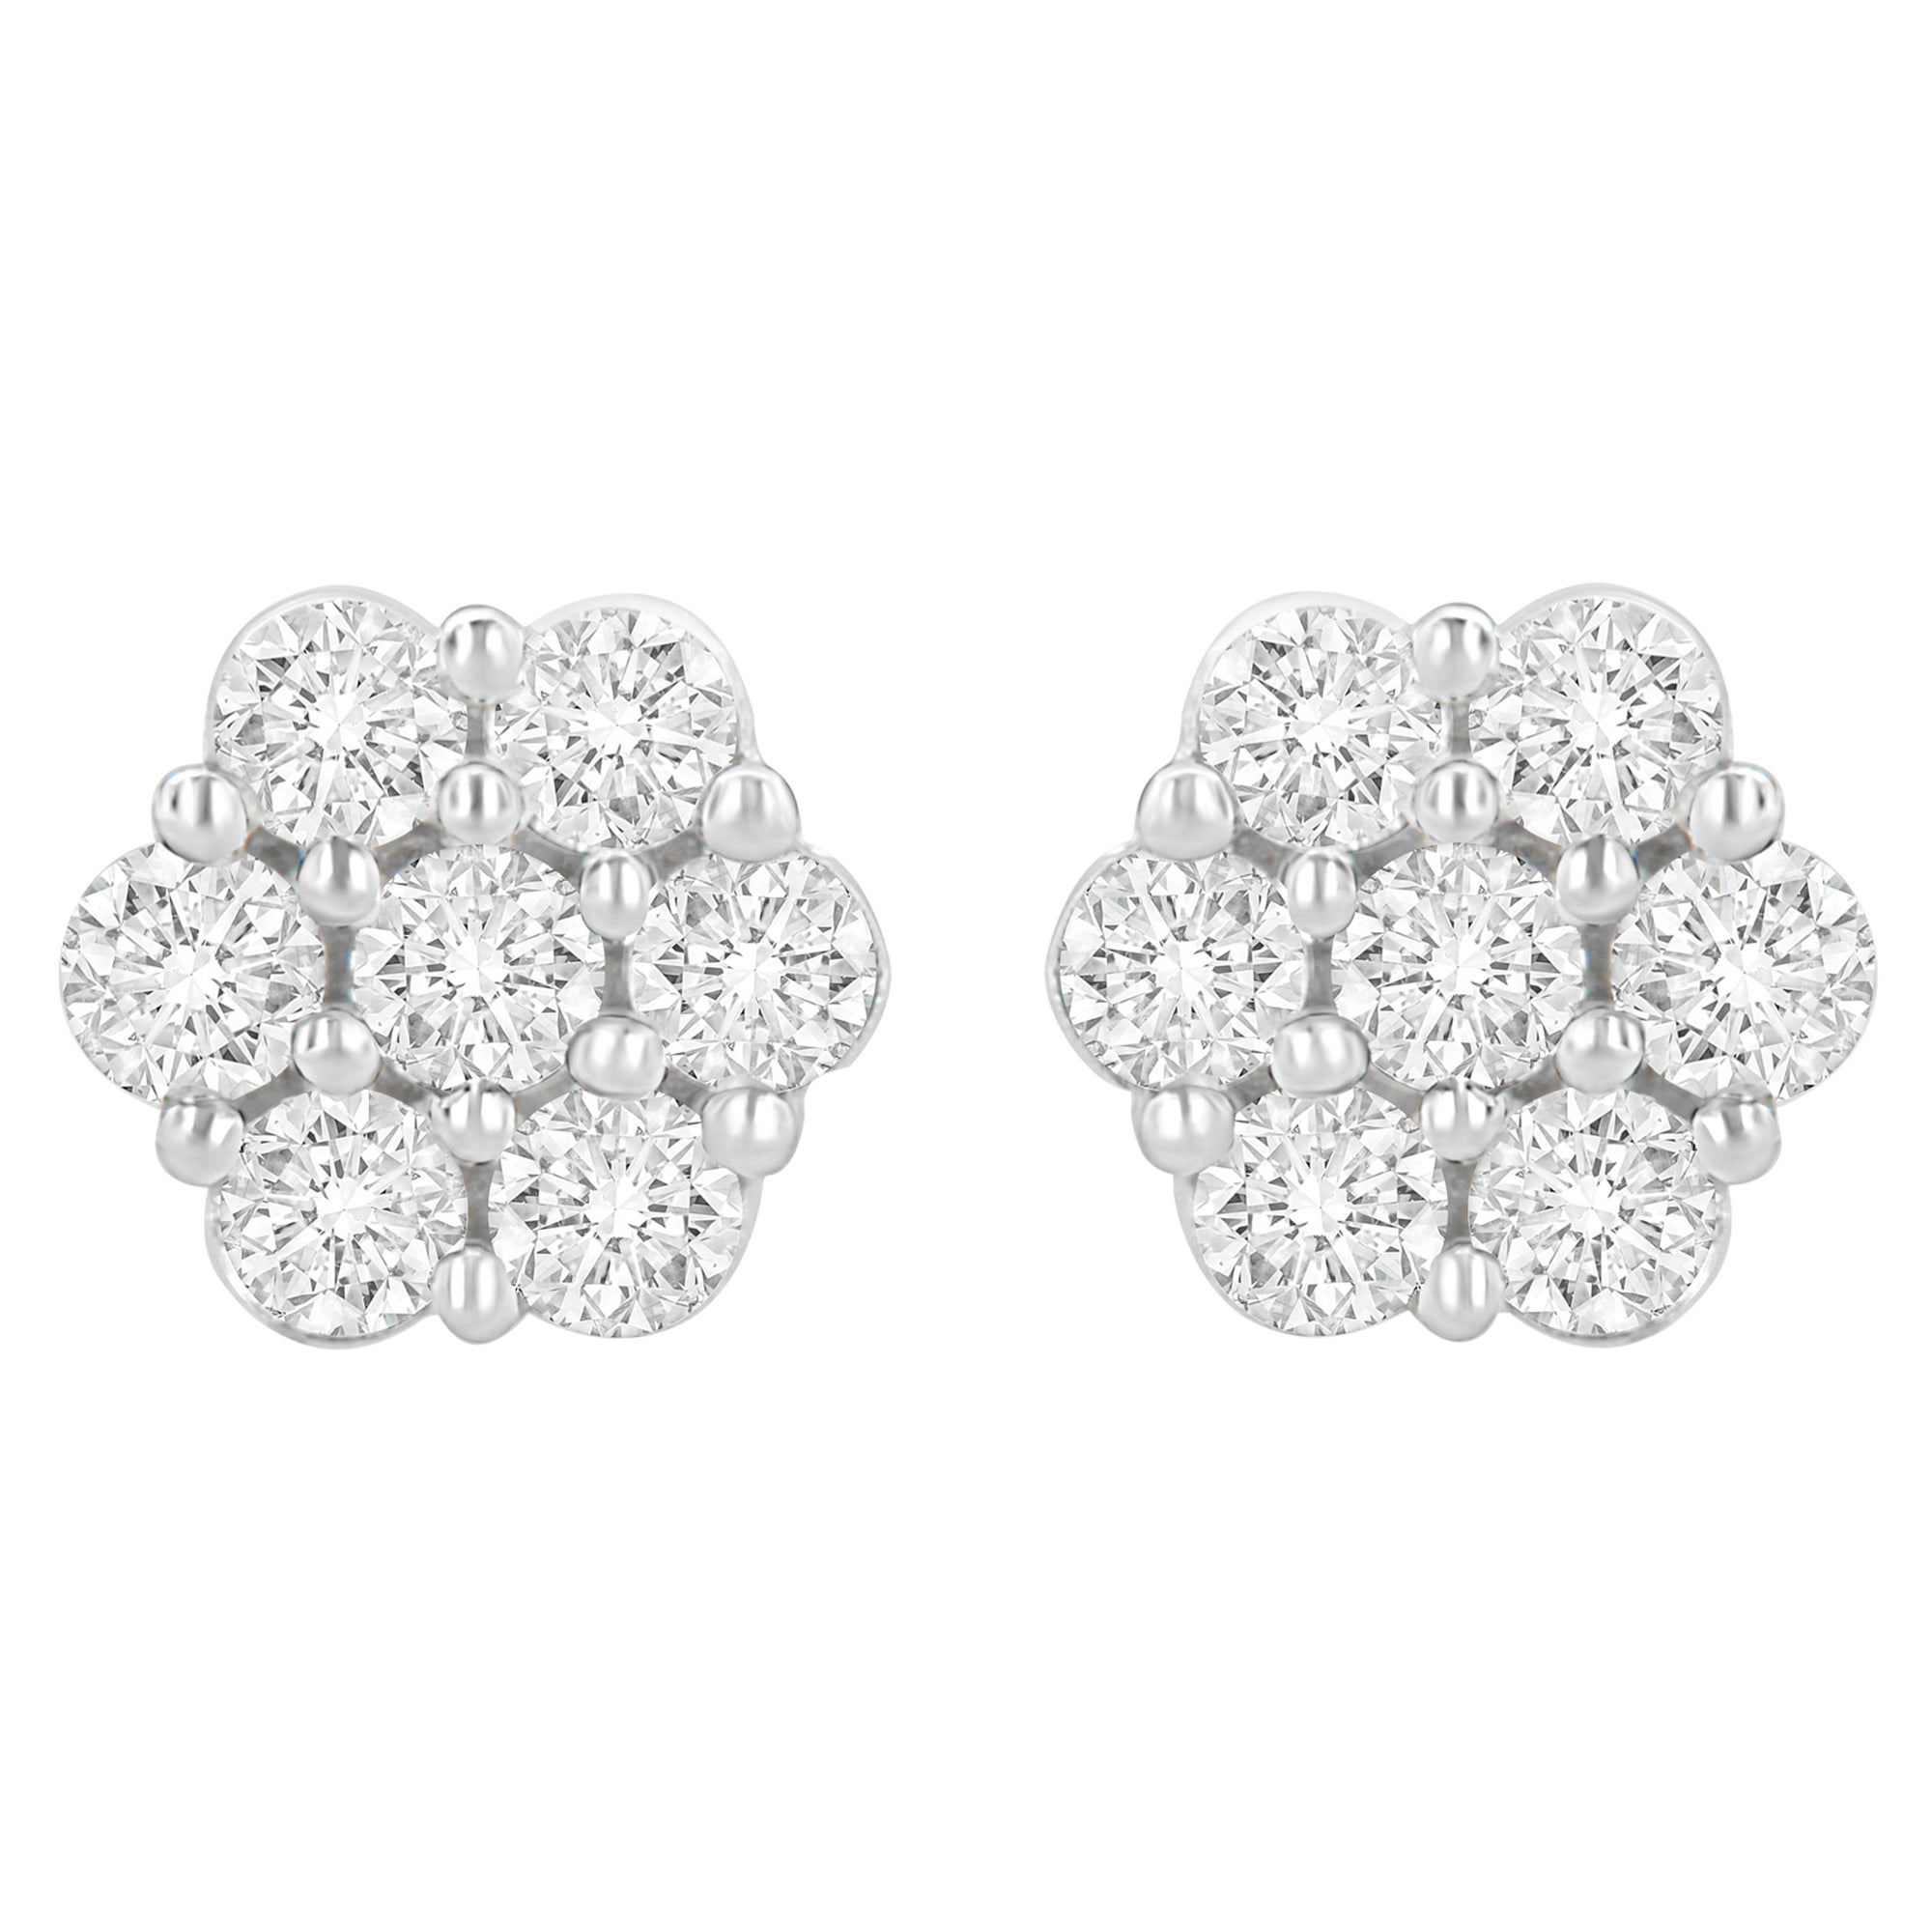 14K White Gold 1 1/2 cttw Round-Cut Diamond Floral Cluster Stud Earrings